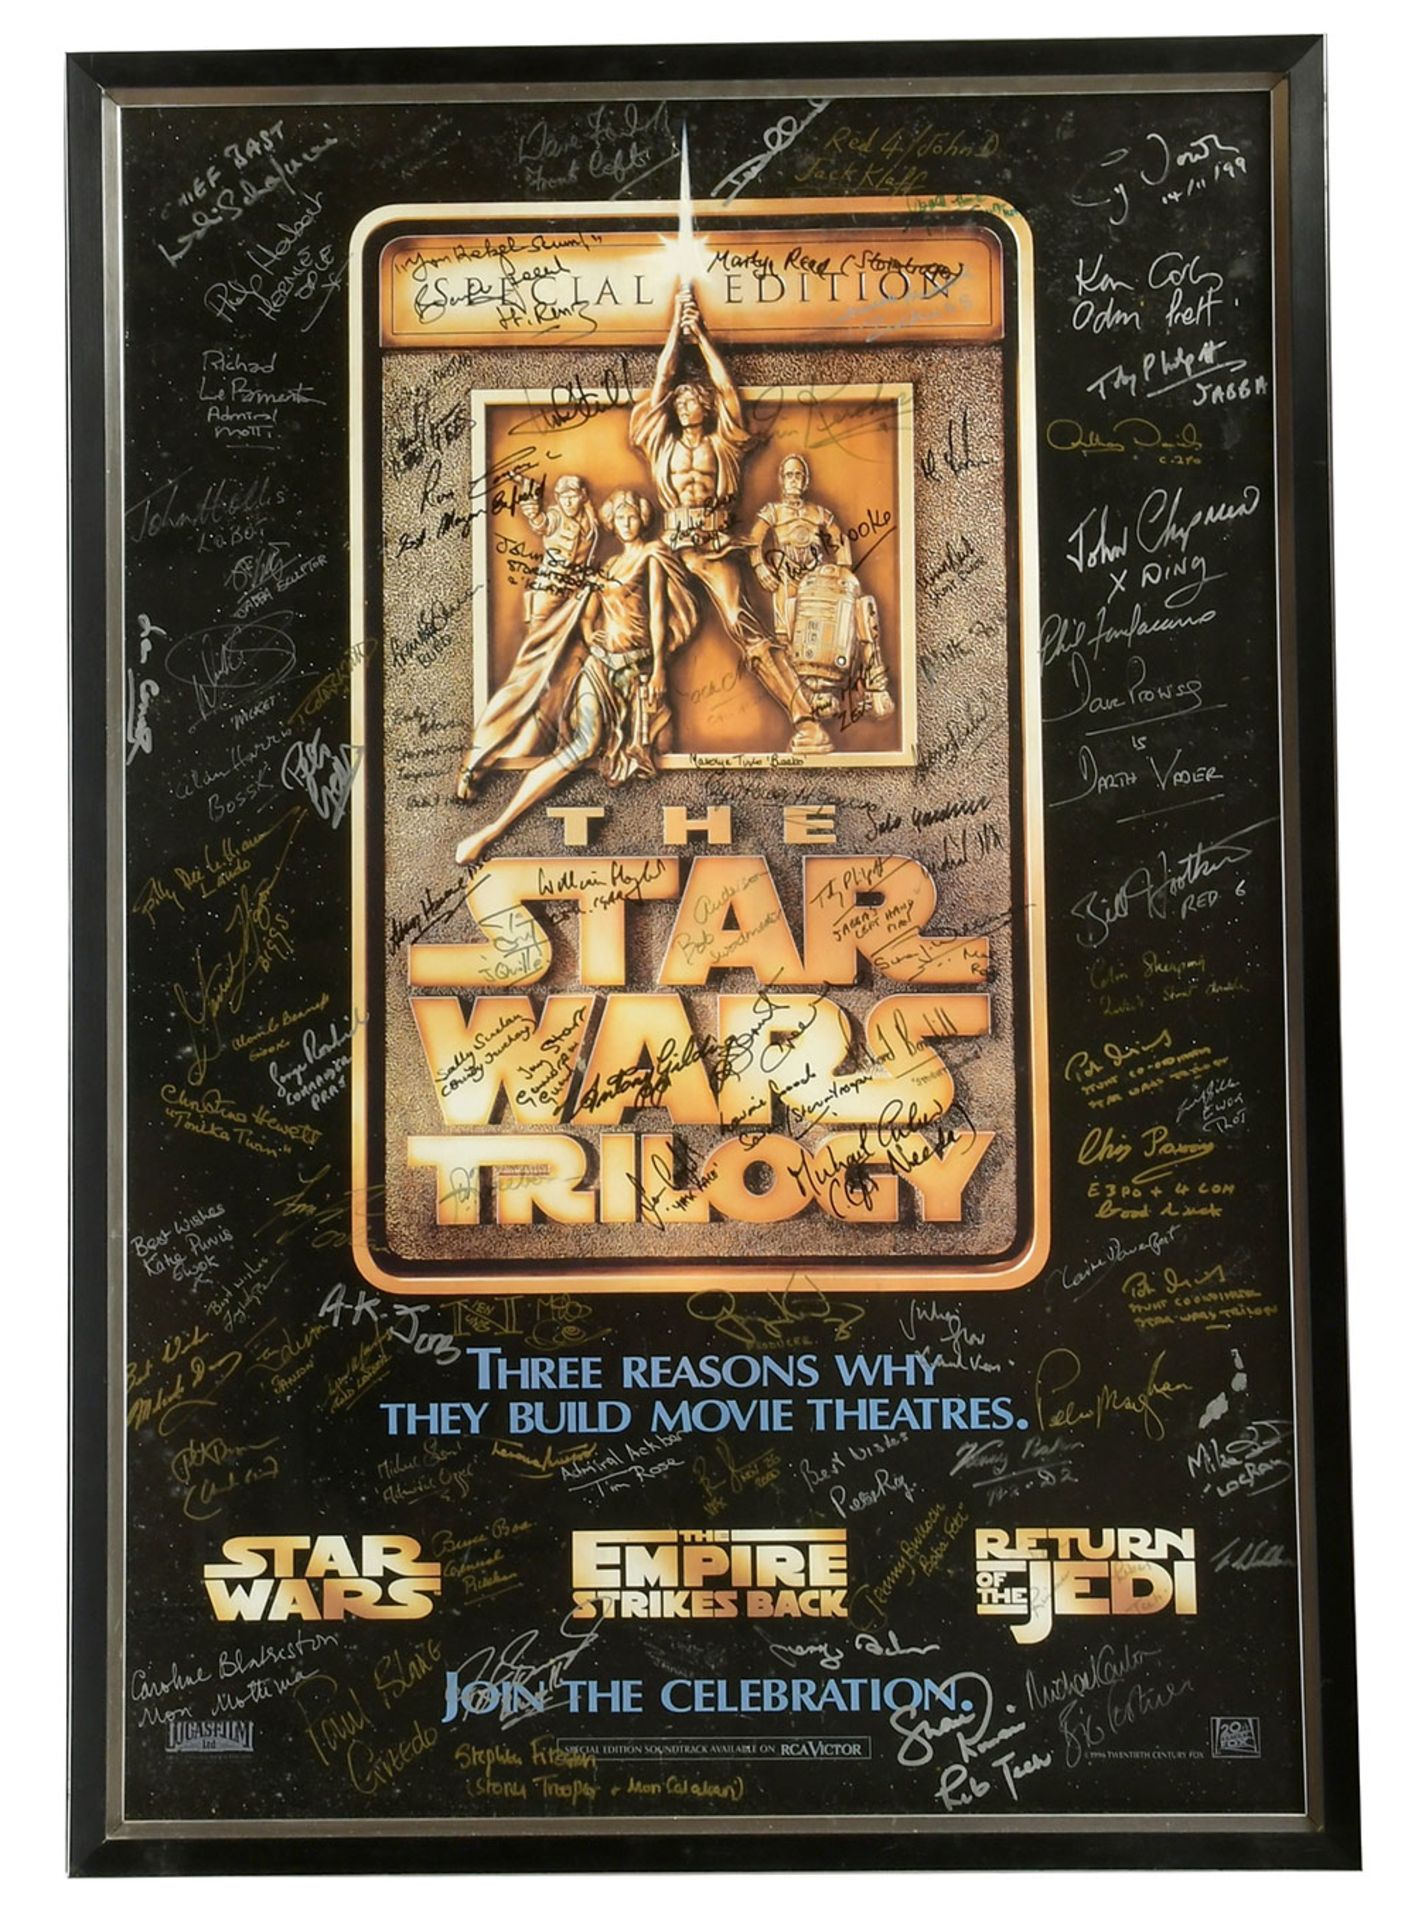 The Star Wars Trilogy poster (reissue) signed